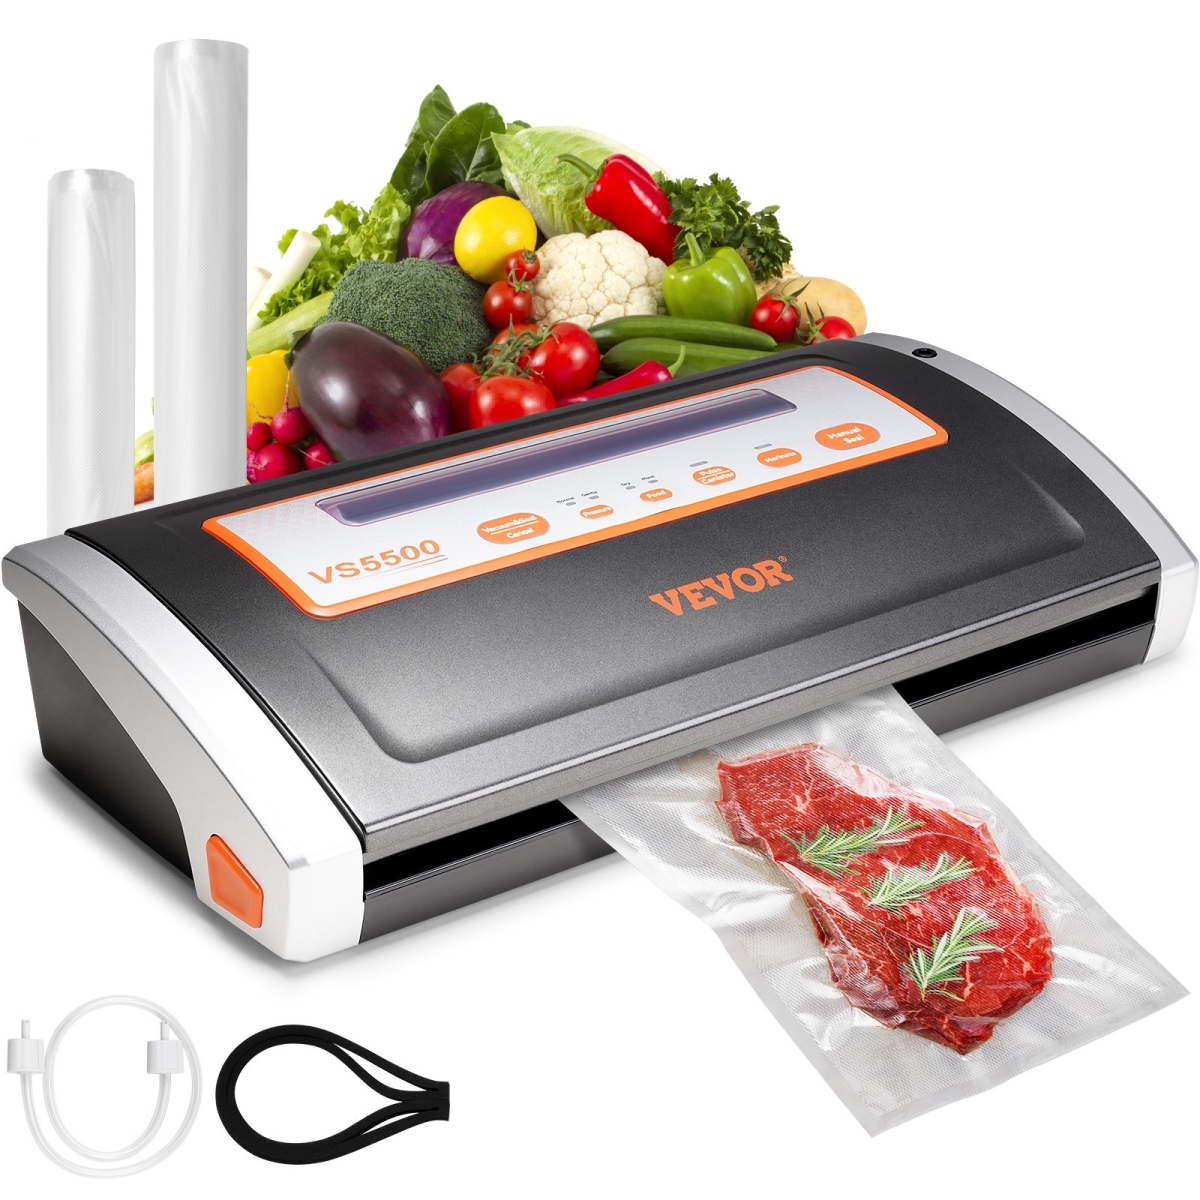 Picture of Vevor SYJZKFKJTSDB3THBZV1 130W Food Vacuum Sealer Machine 80 Kpa Automatic & Manual Seal Machine Multifunctional for Dry & Moist Food Storage